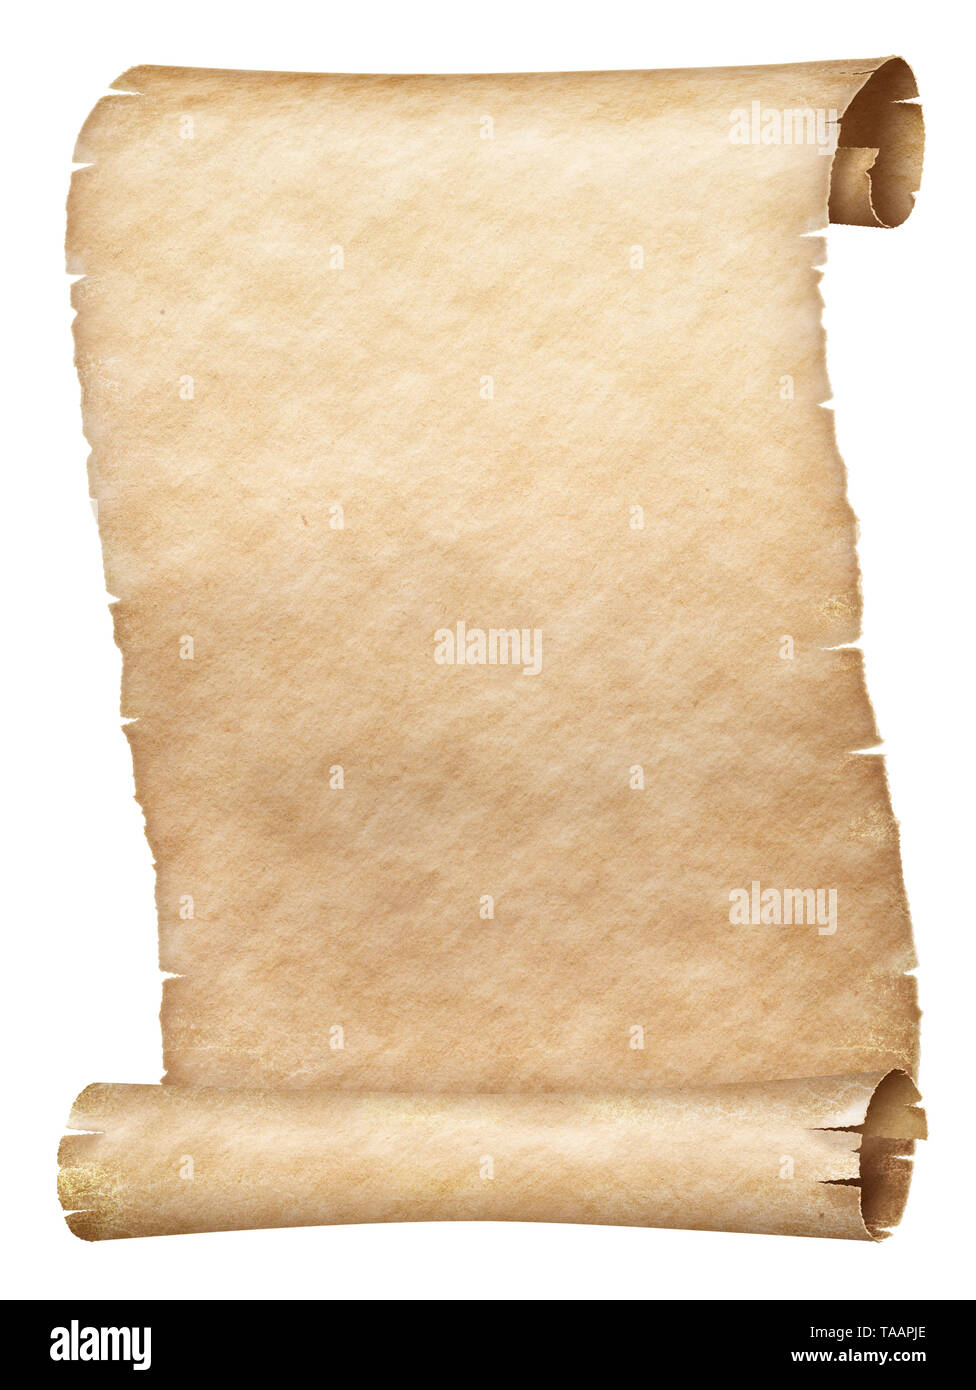 Old Parchment PNG Picture, Unrolled Old Texture Parchment Roll Paper  Element, Open, Texture, Vintage Style PNG Image For Free Download